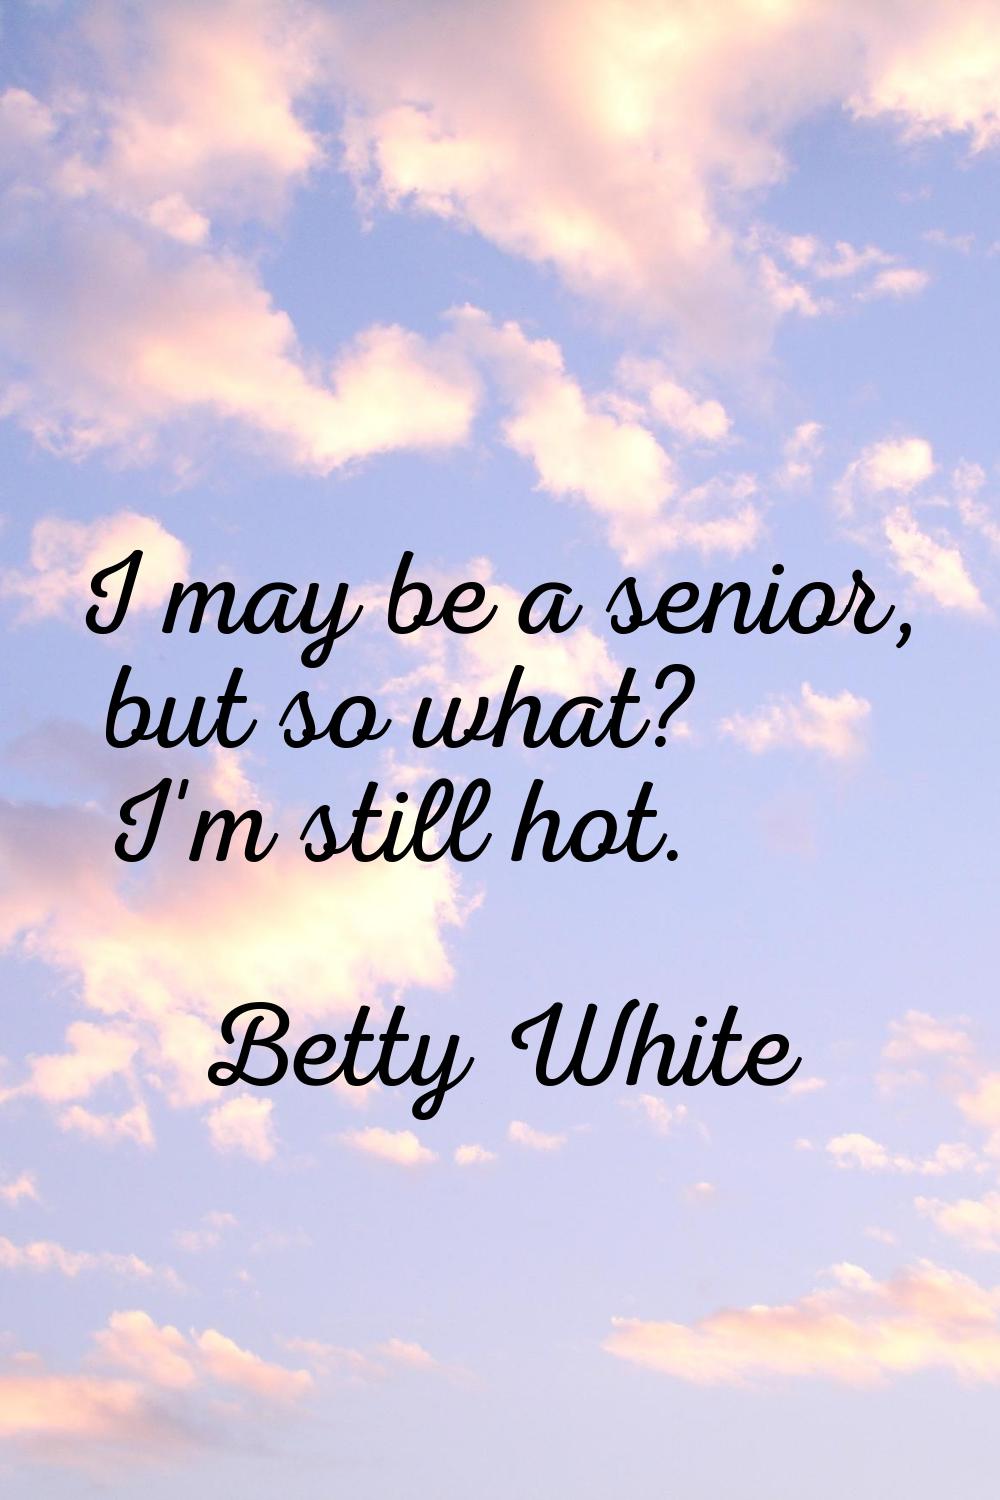 I may be a senior, but so what? I'm still hot.